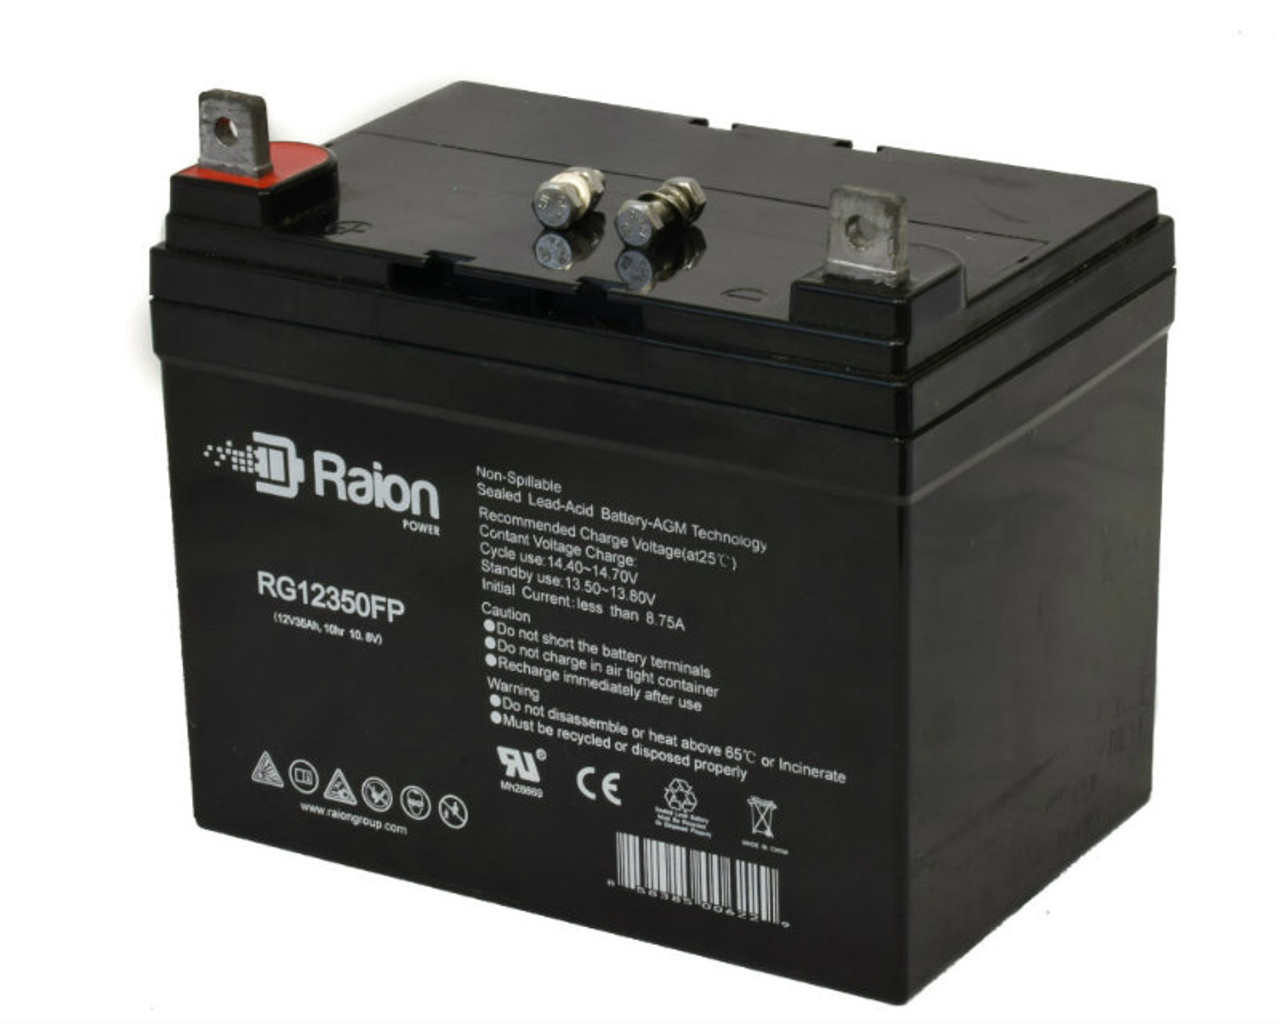 Raion Power Replacement 12V 35Ah RG12350FP Battery for Wilkov (Wisc. Engines) 2512